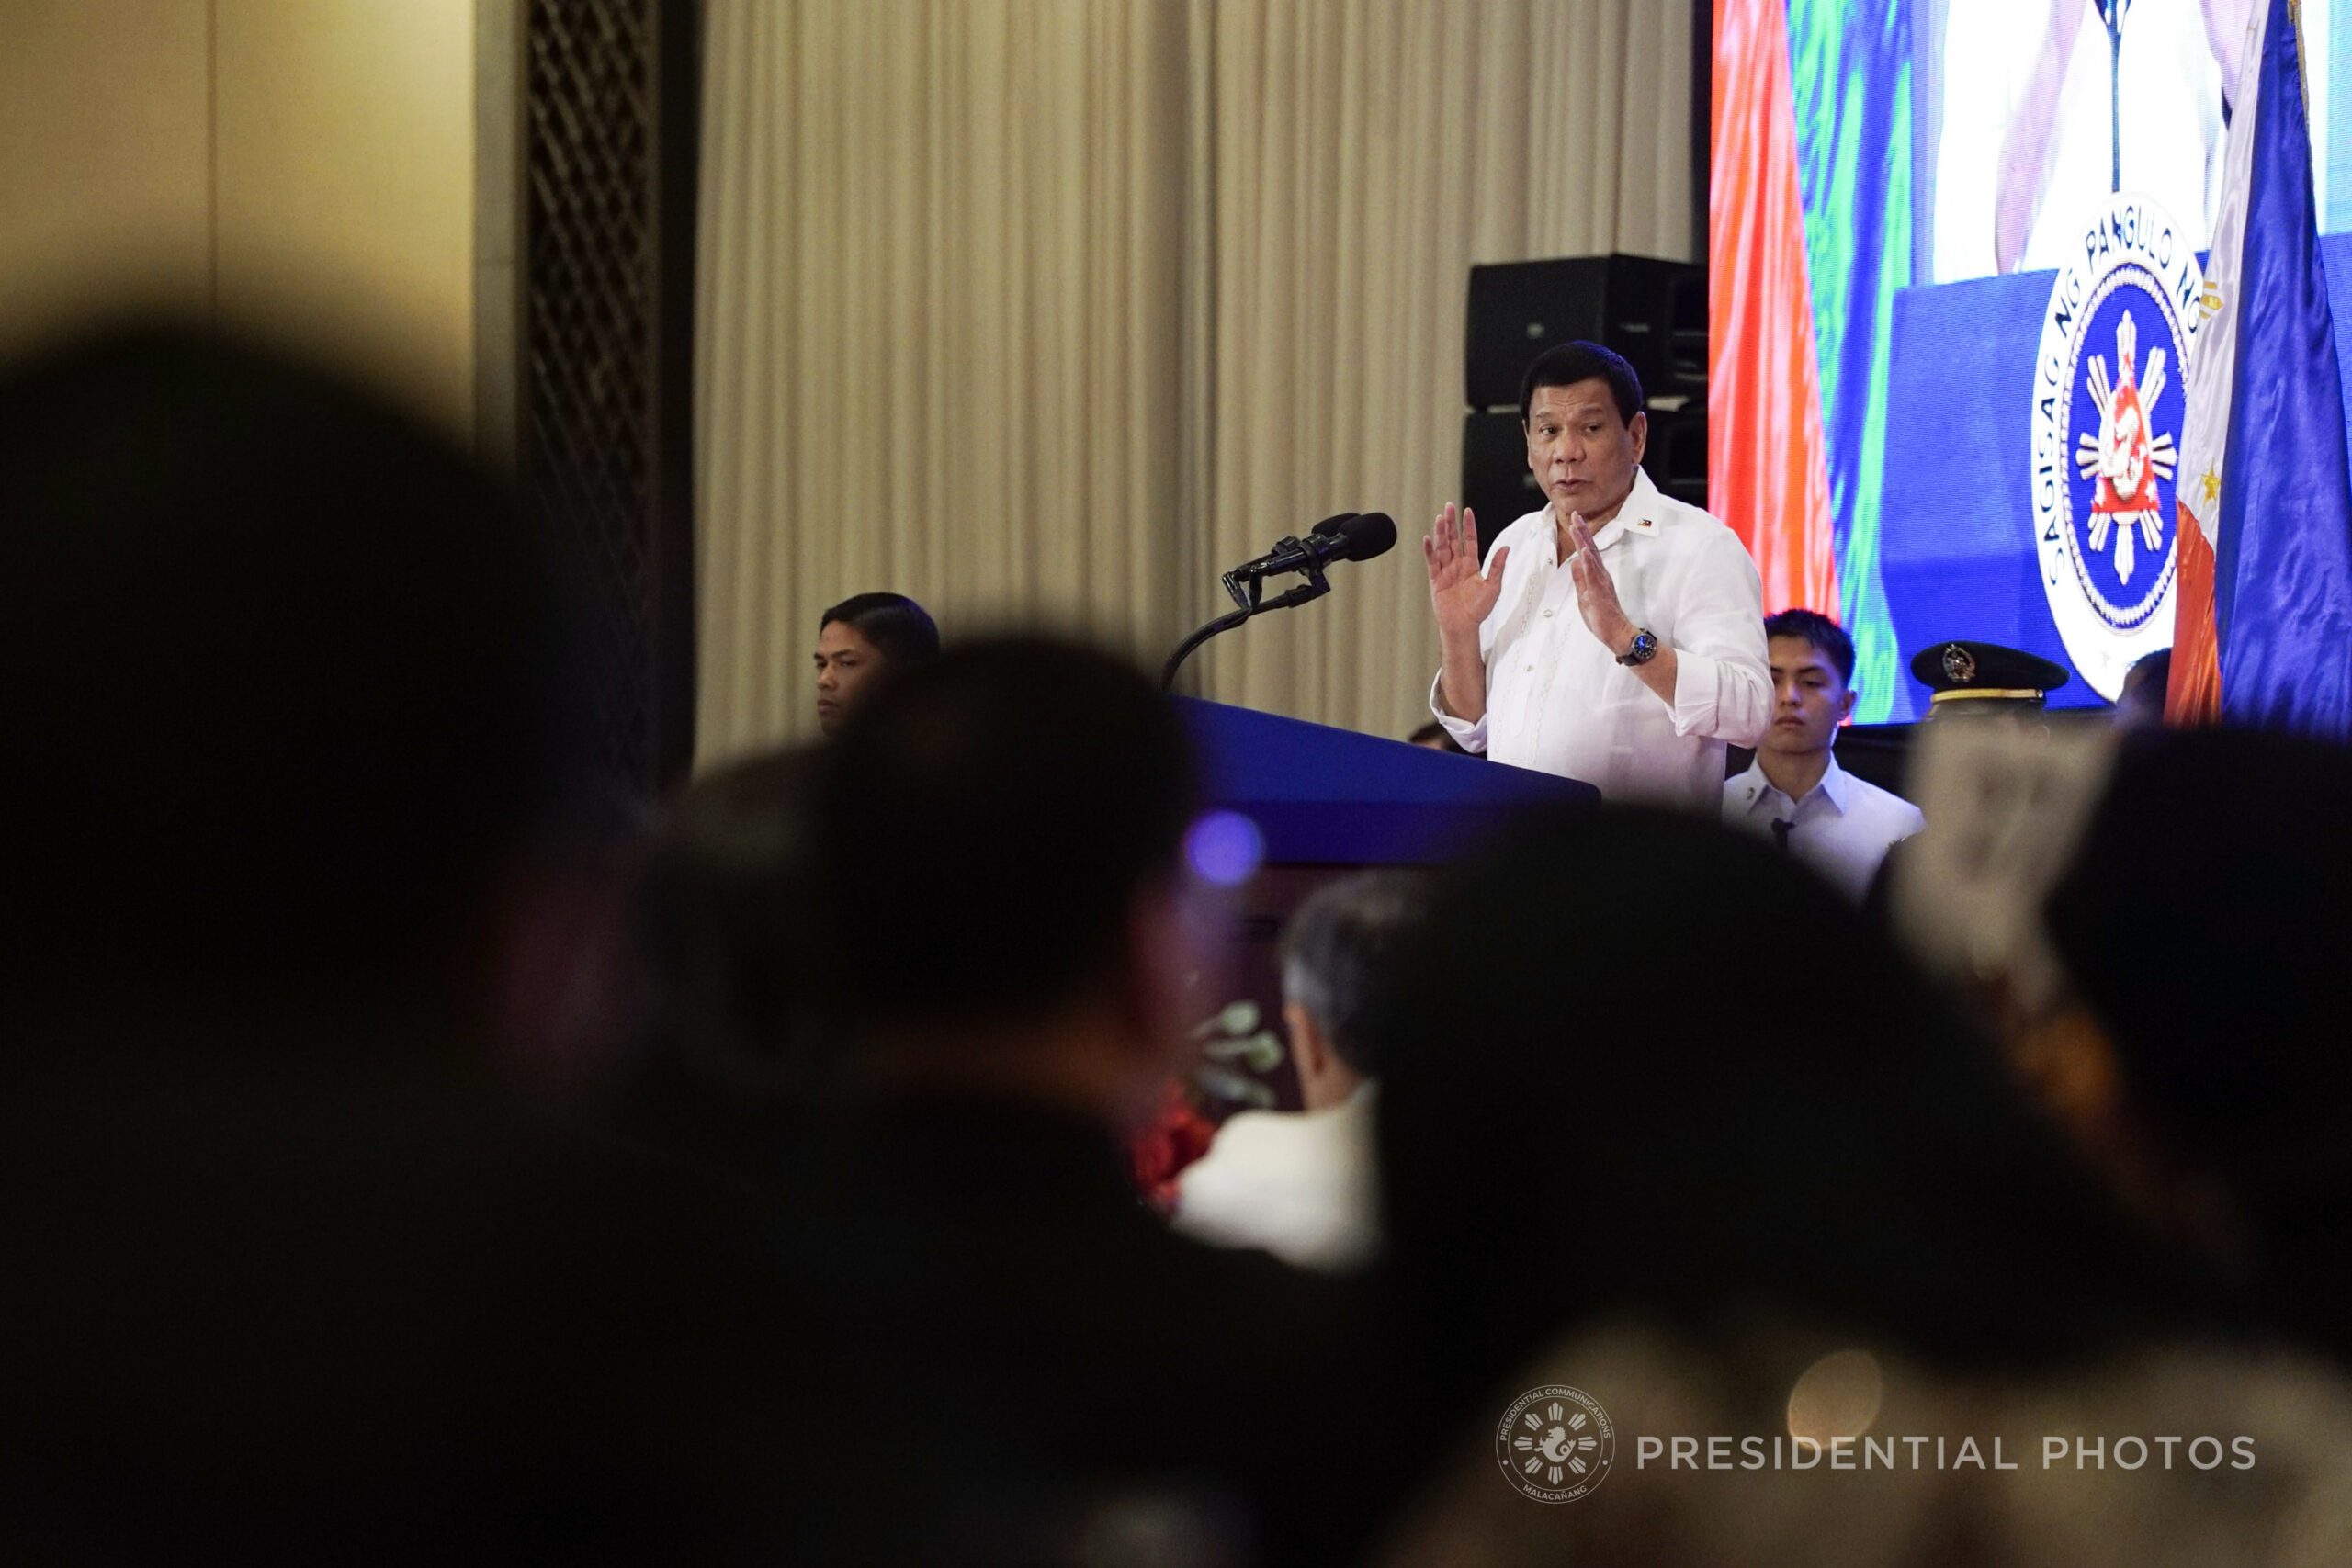 Duterte: ‘If Joma Sison comes here, I will arrest him’